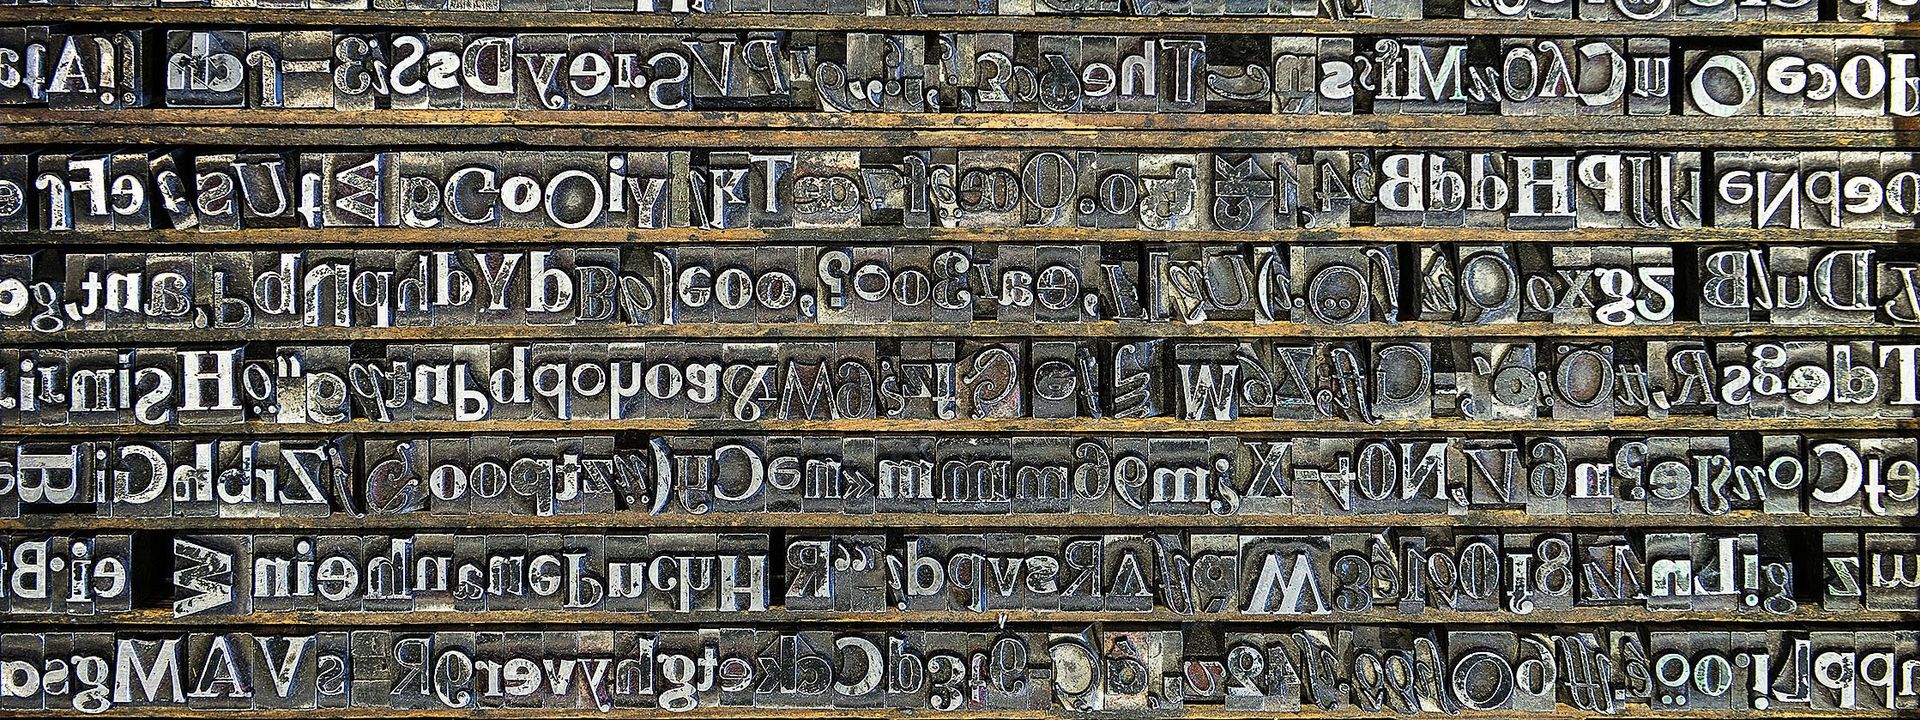 Many different types – raised, inverse letters made of lead – are arranged in a type case.